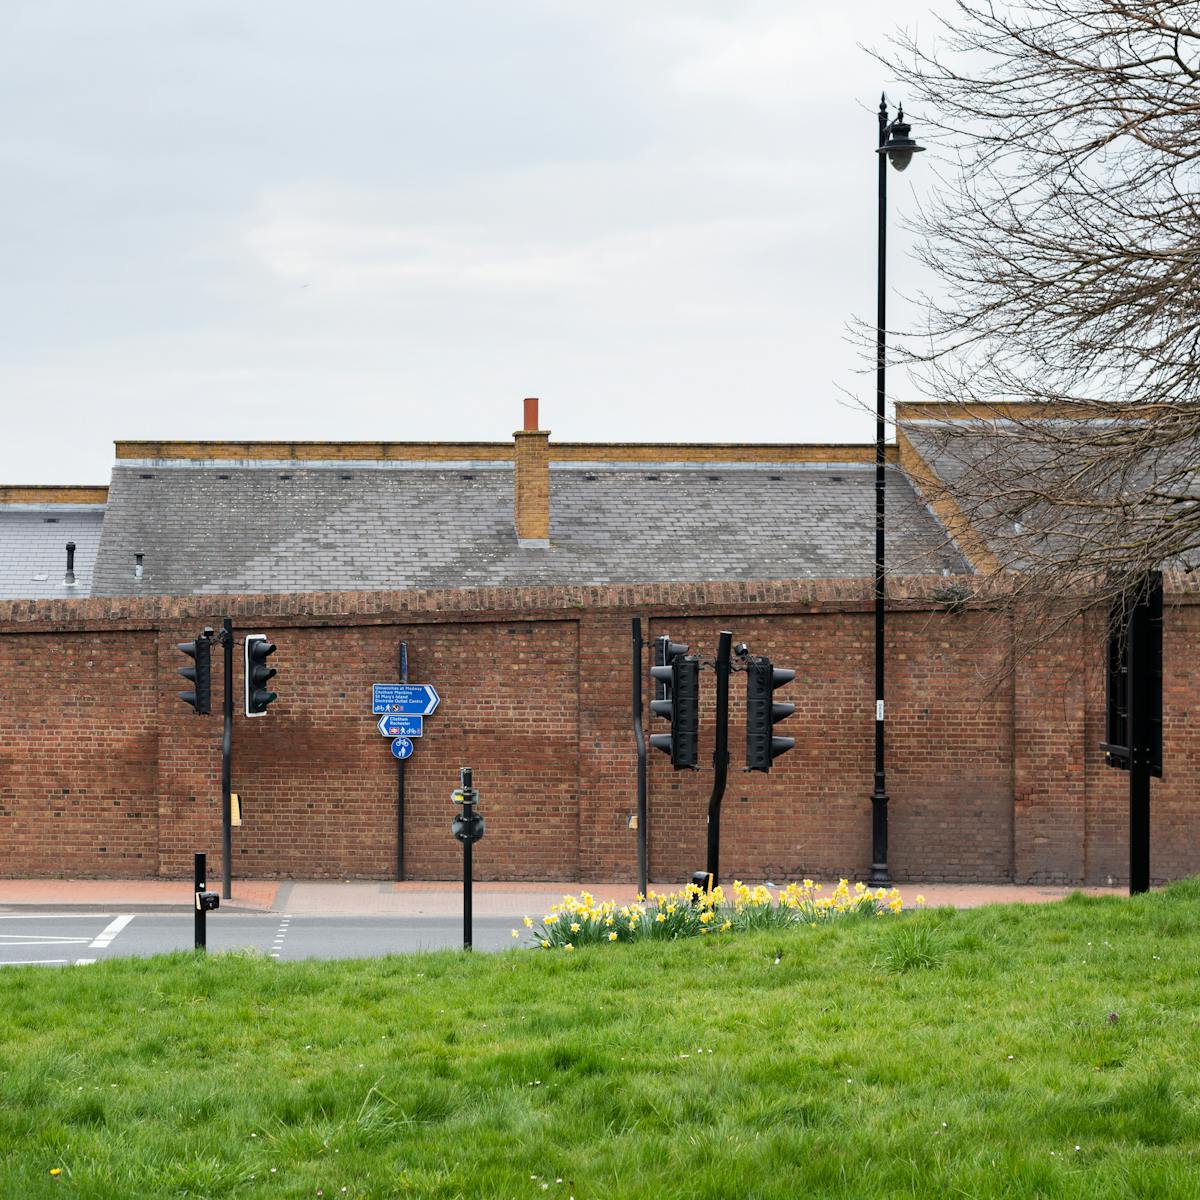 Photograph of a high redbrick wall running from left to right, in front of which is an empty road and a crossing with traffic lights and road signs. At the bottom of the image is a grass verge with a small crop of bright yellow daffodils.